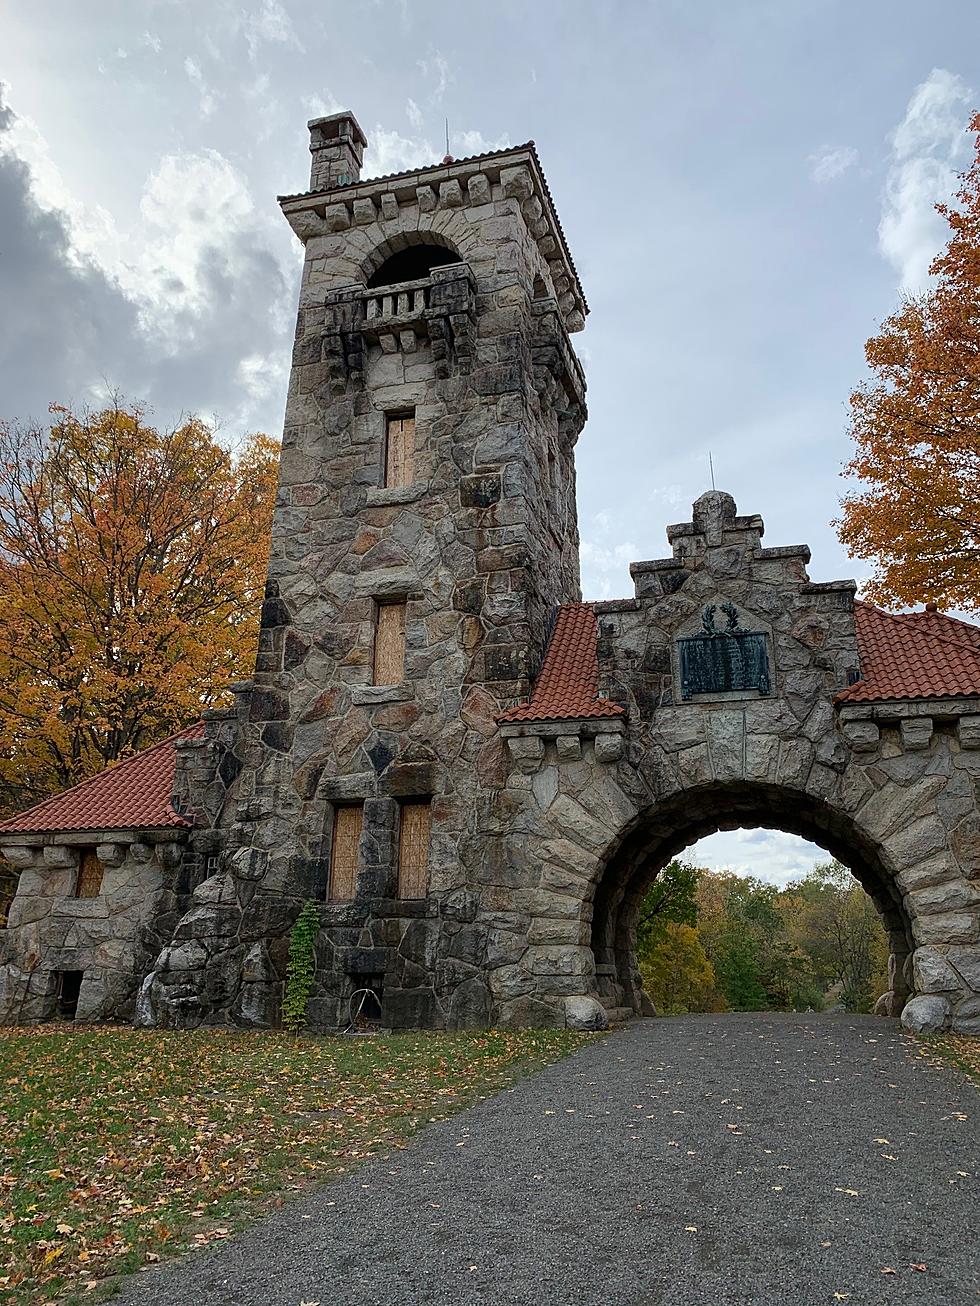 An Abandoned Castle You Can Hike to That’s Near the Hudson Valley?